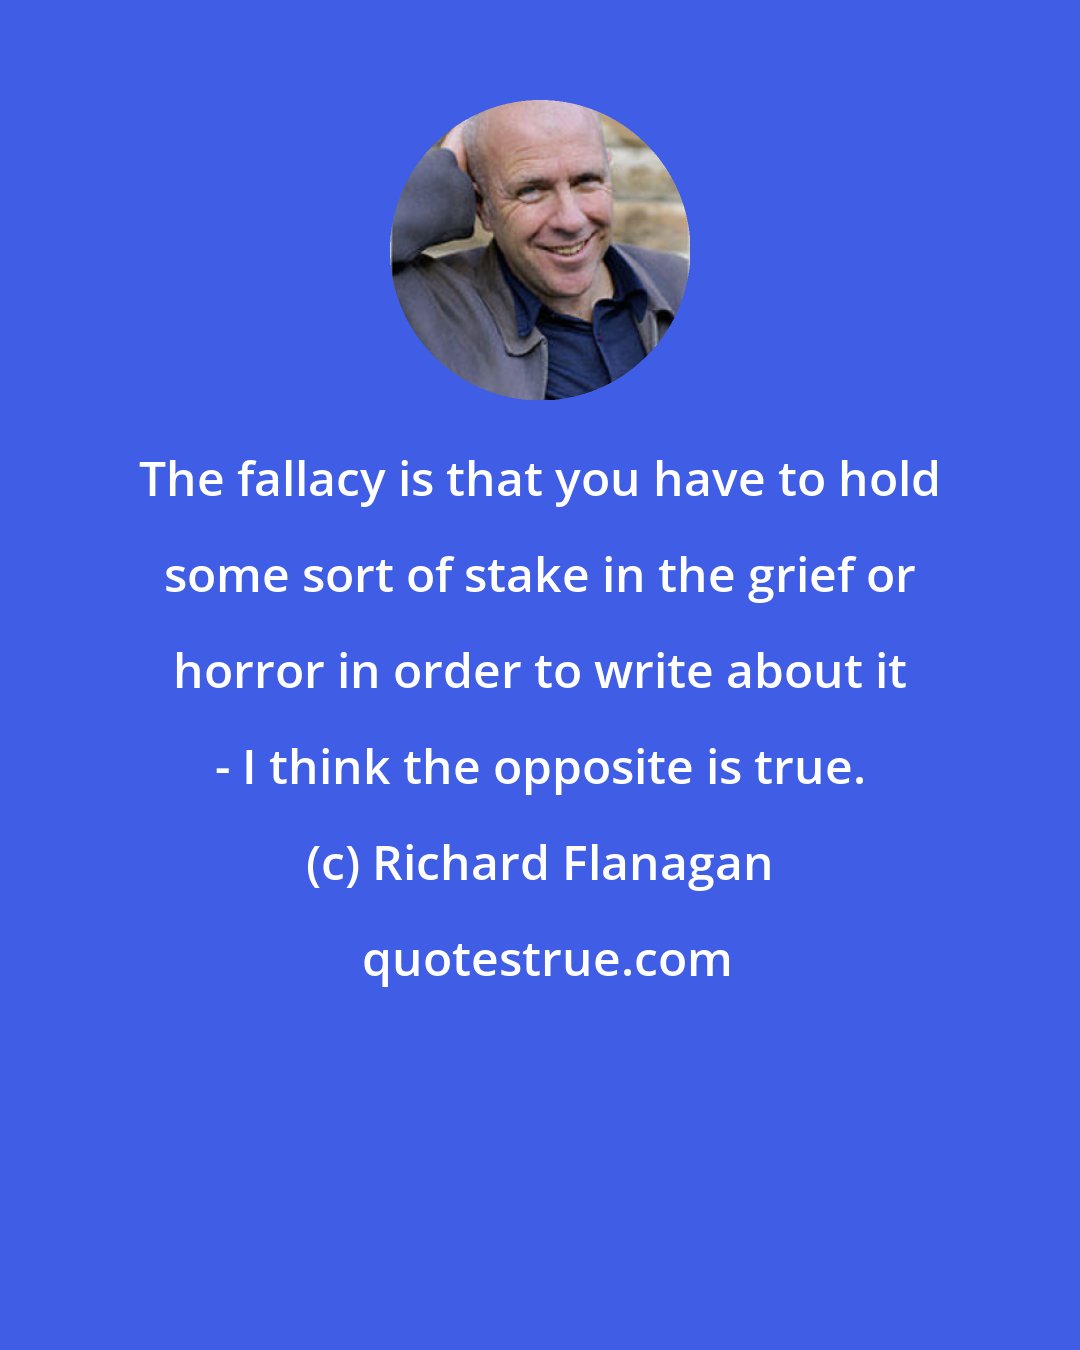 Richard Flanagan: The fallacy is that you have to hold some sort of stake in the grief or horror in order to write about it - I think the opposite is true.